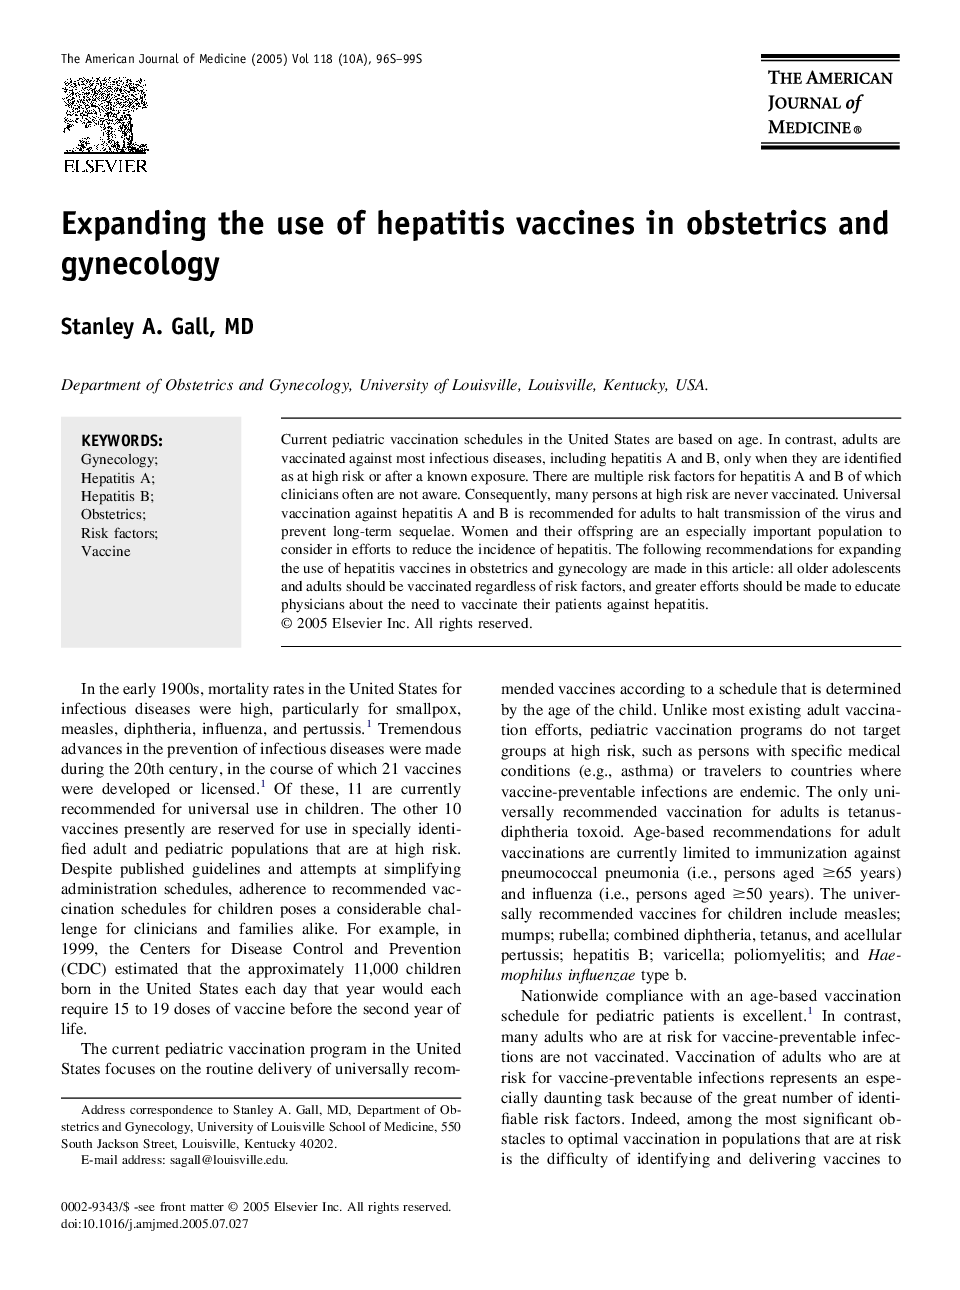 Expanding the use of hepatitis vaccines in obstetrics and gynecology